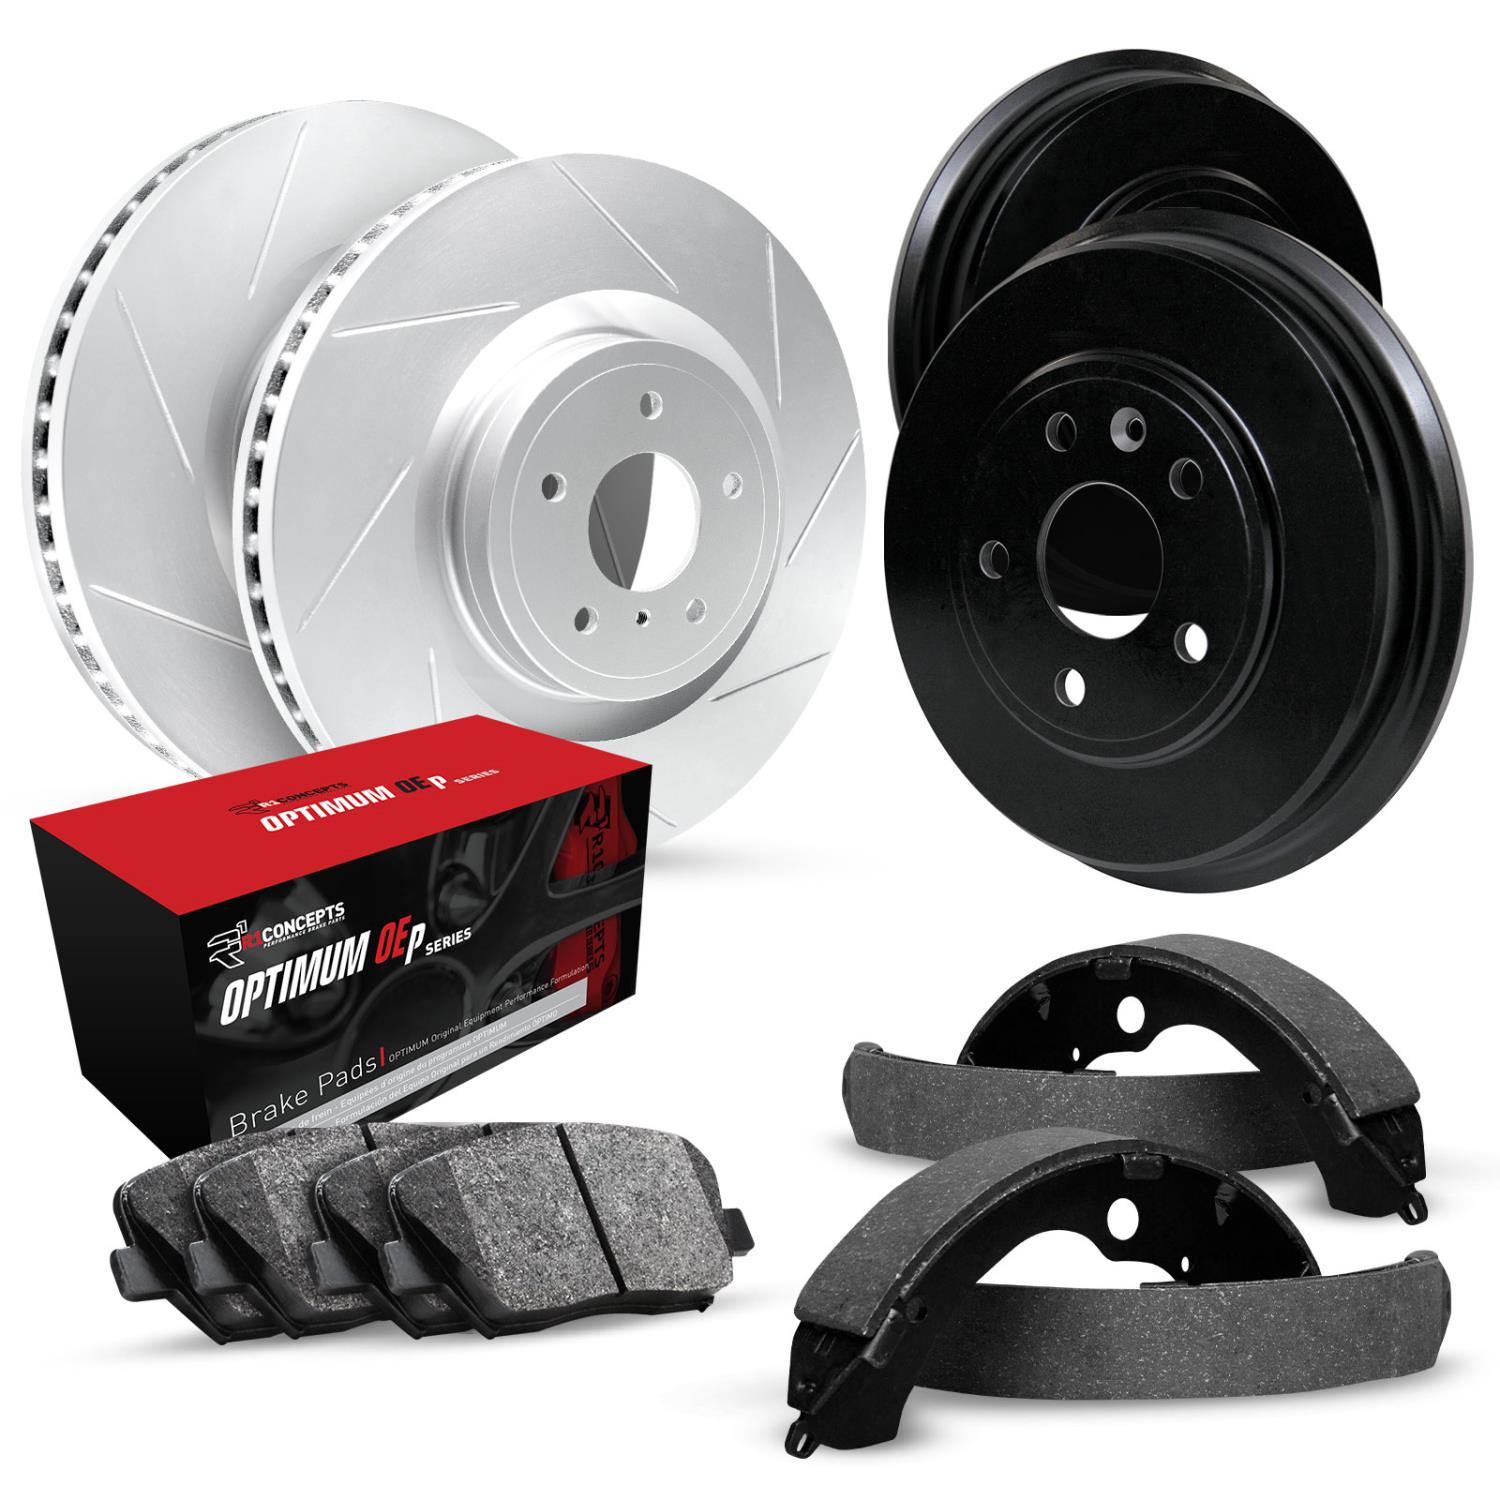 GEO-Carbon Slotted Brake Rotor & Drum Set w/Optimum OE Pads & Shoes, 1990-1992 Infiniti/Nissan, Position: Front & Rear